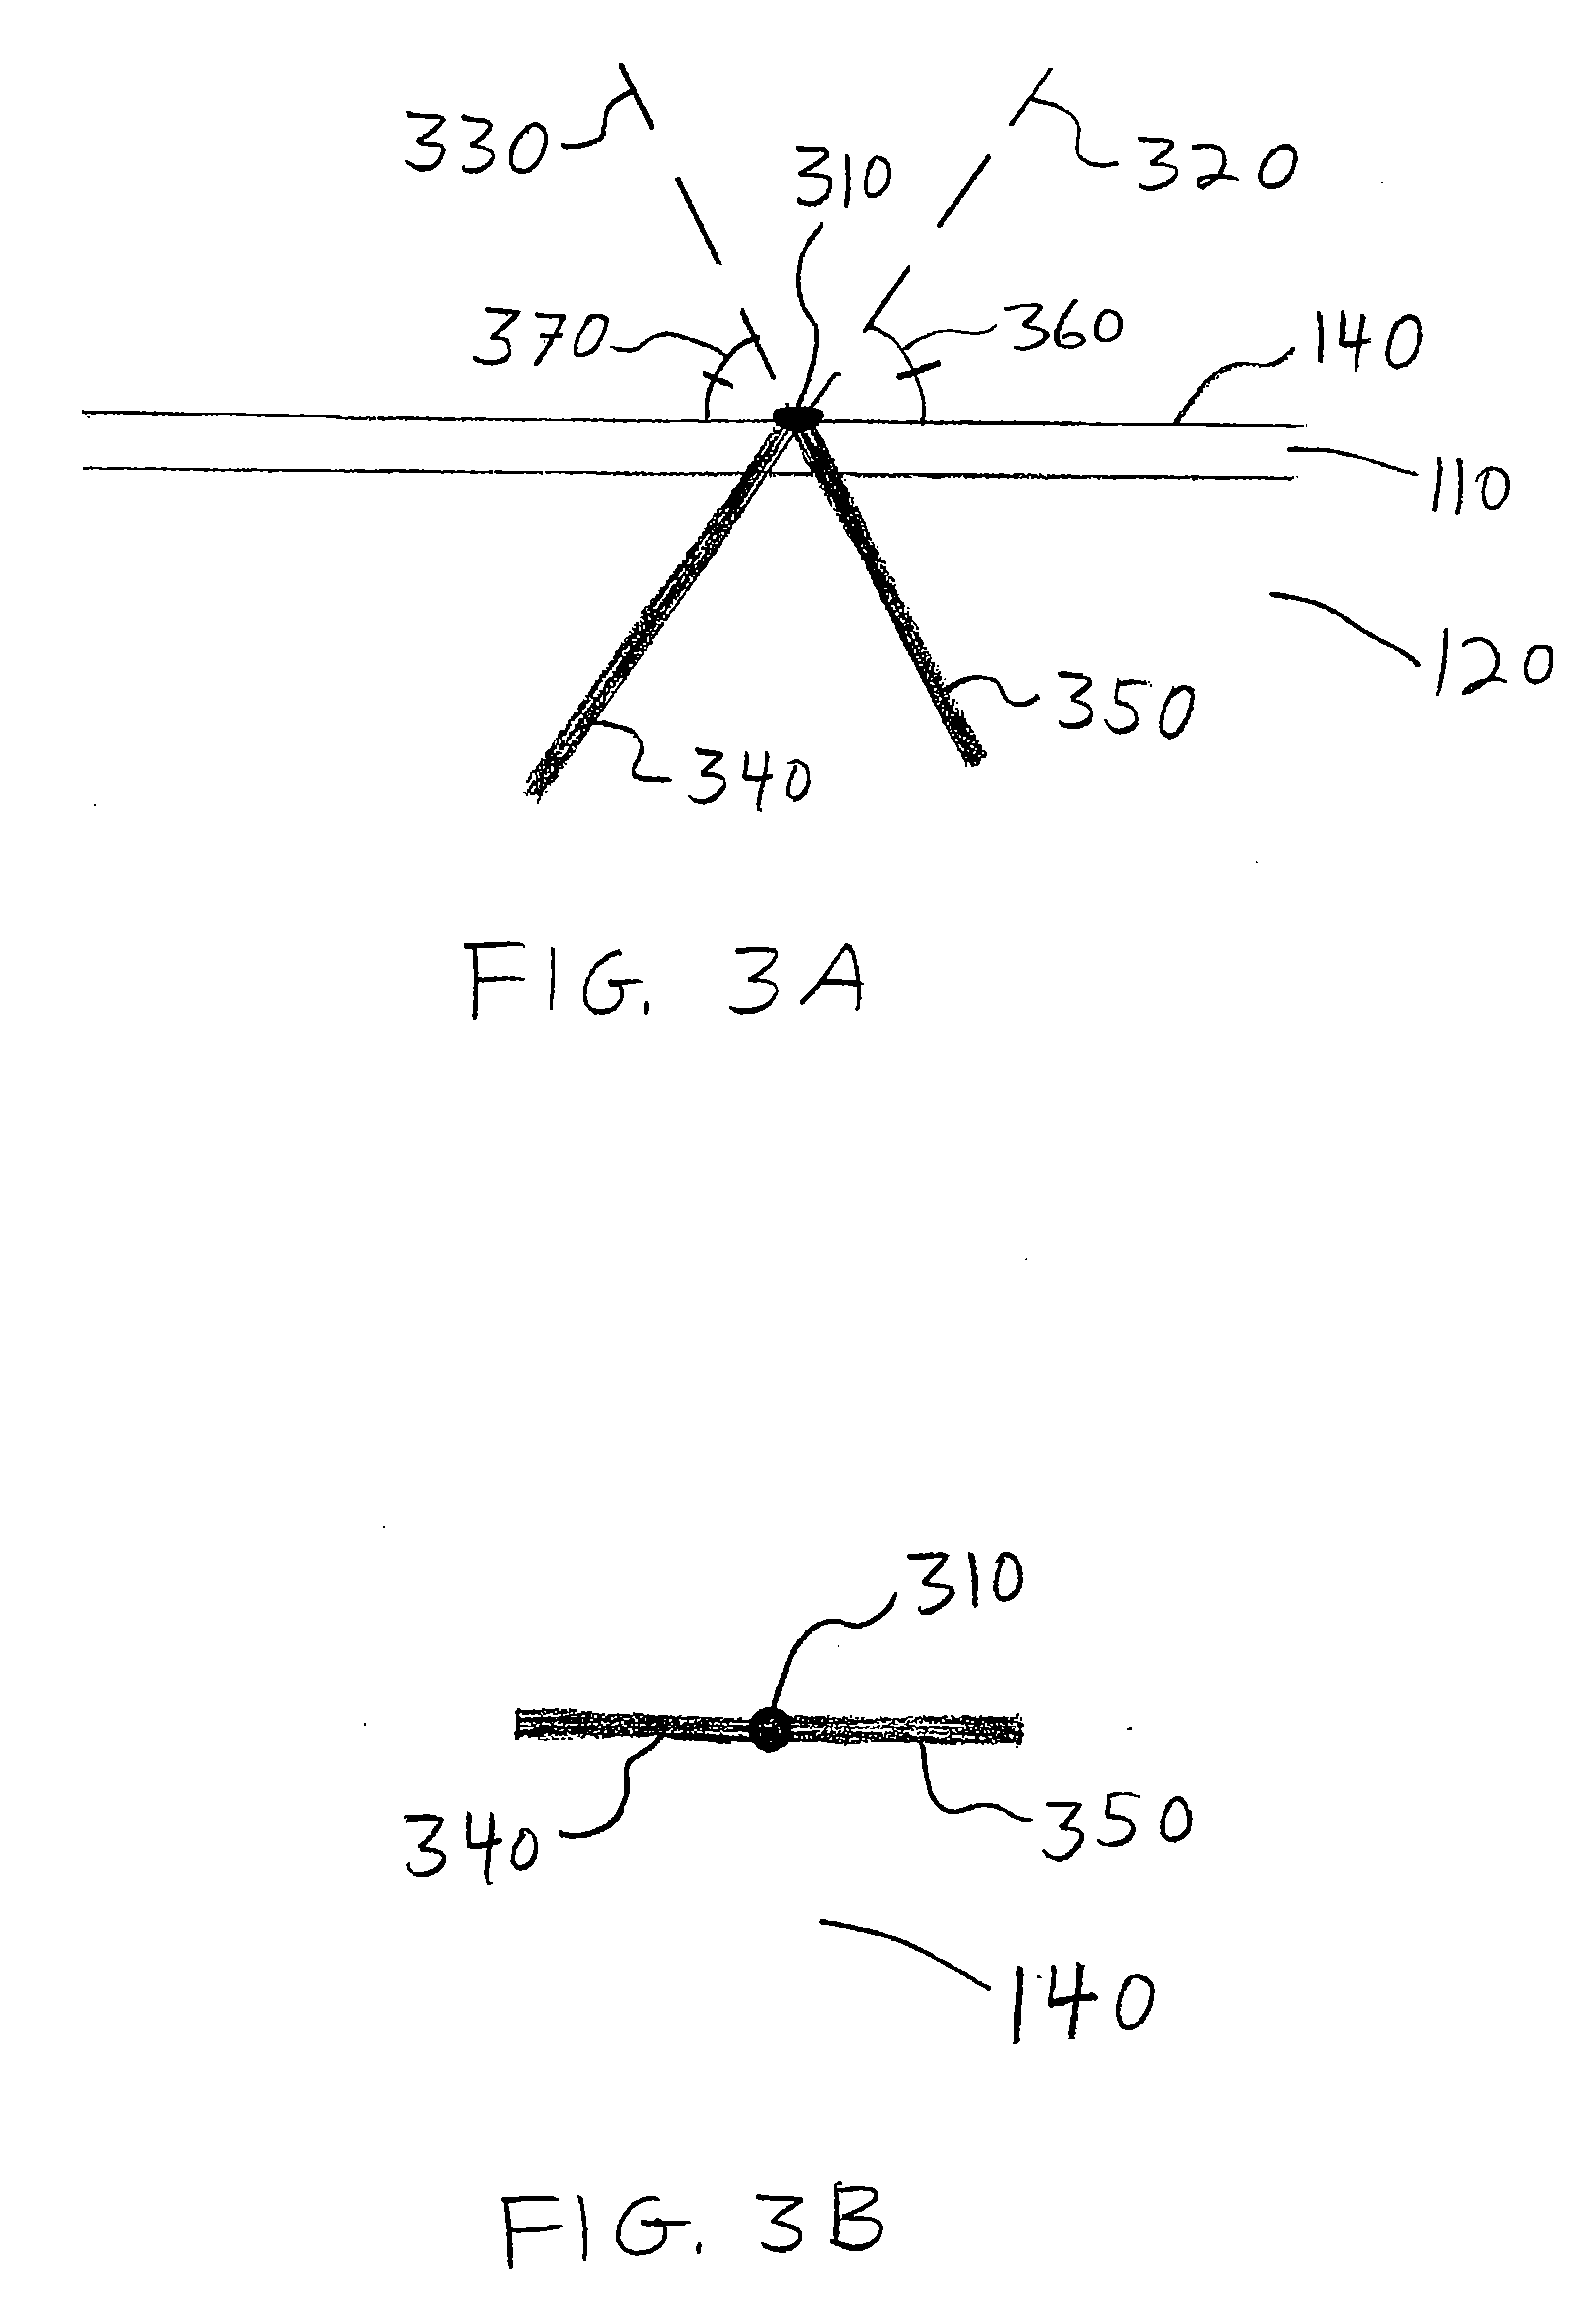 Method, system and apparatus for dermatological treatment and fractional skin resurfacing